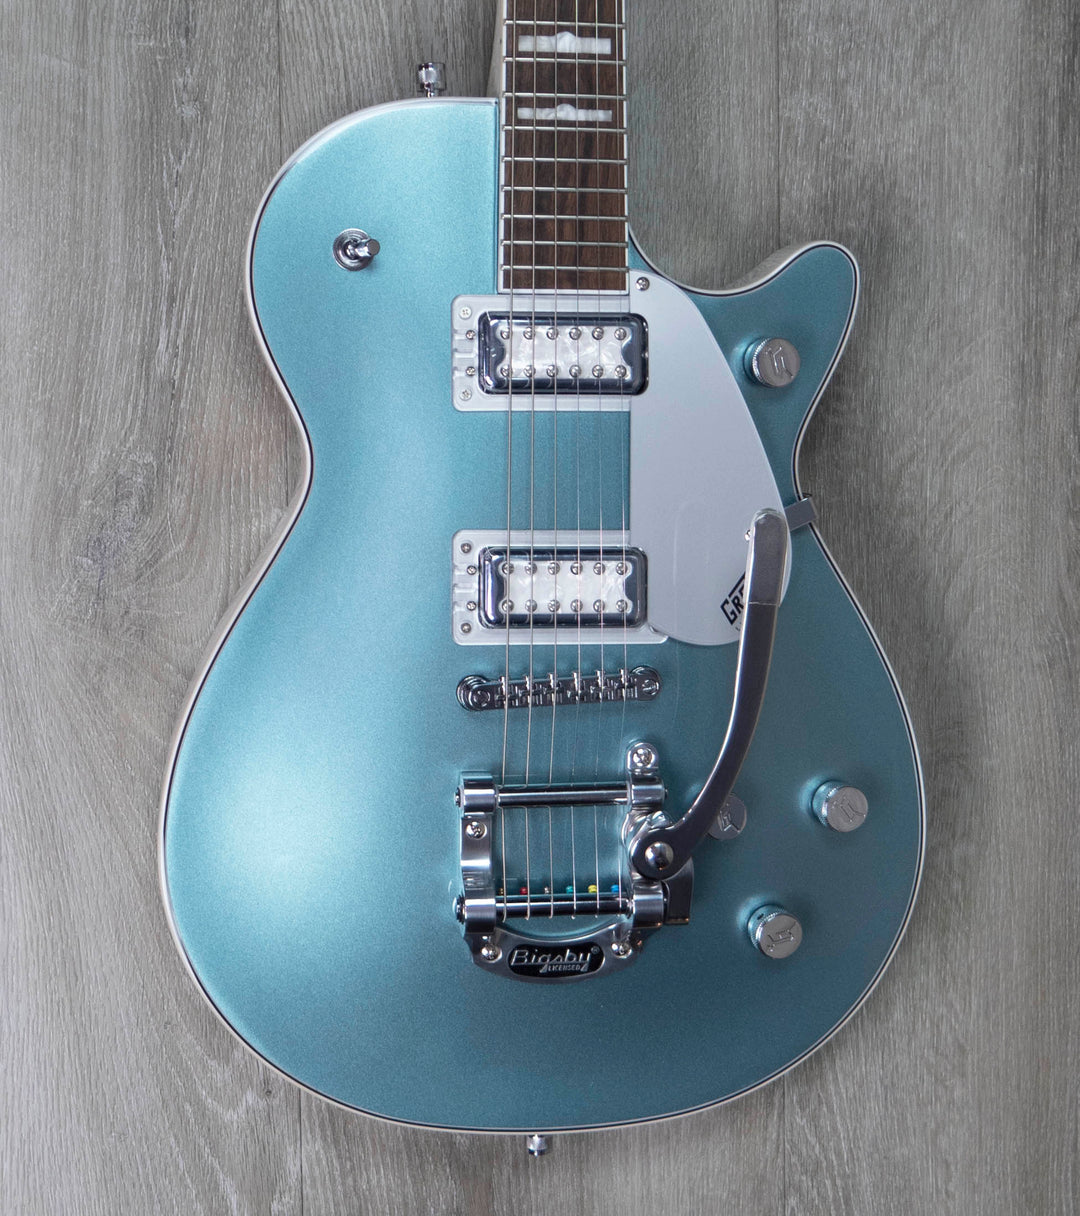 Gretsch G5230T-140 Electromatic 140th Double Platinum Jet with Bigsby, Laurel Fingerboard, Two-Tone Stone Platinum/Pearl Platinum